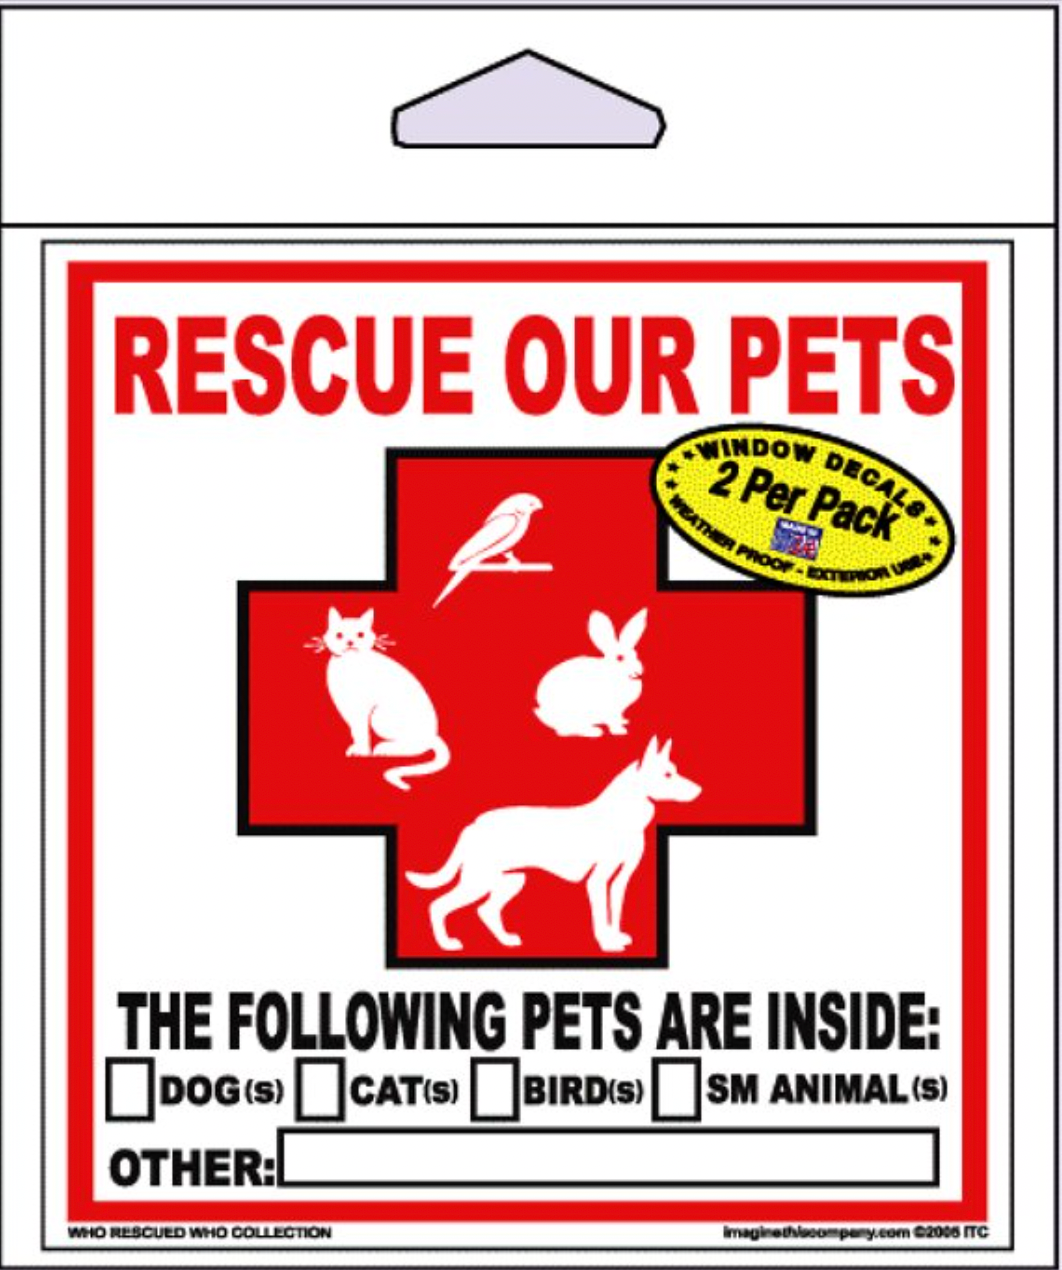 Pet fire safety window cling, available at Chewy.com